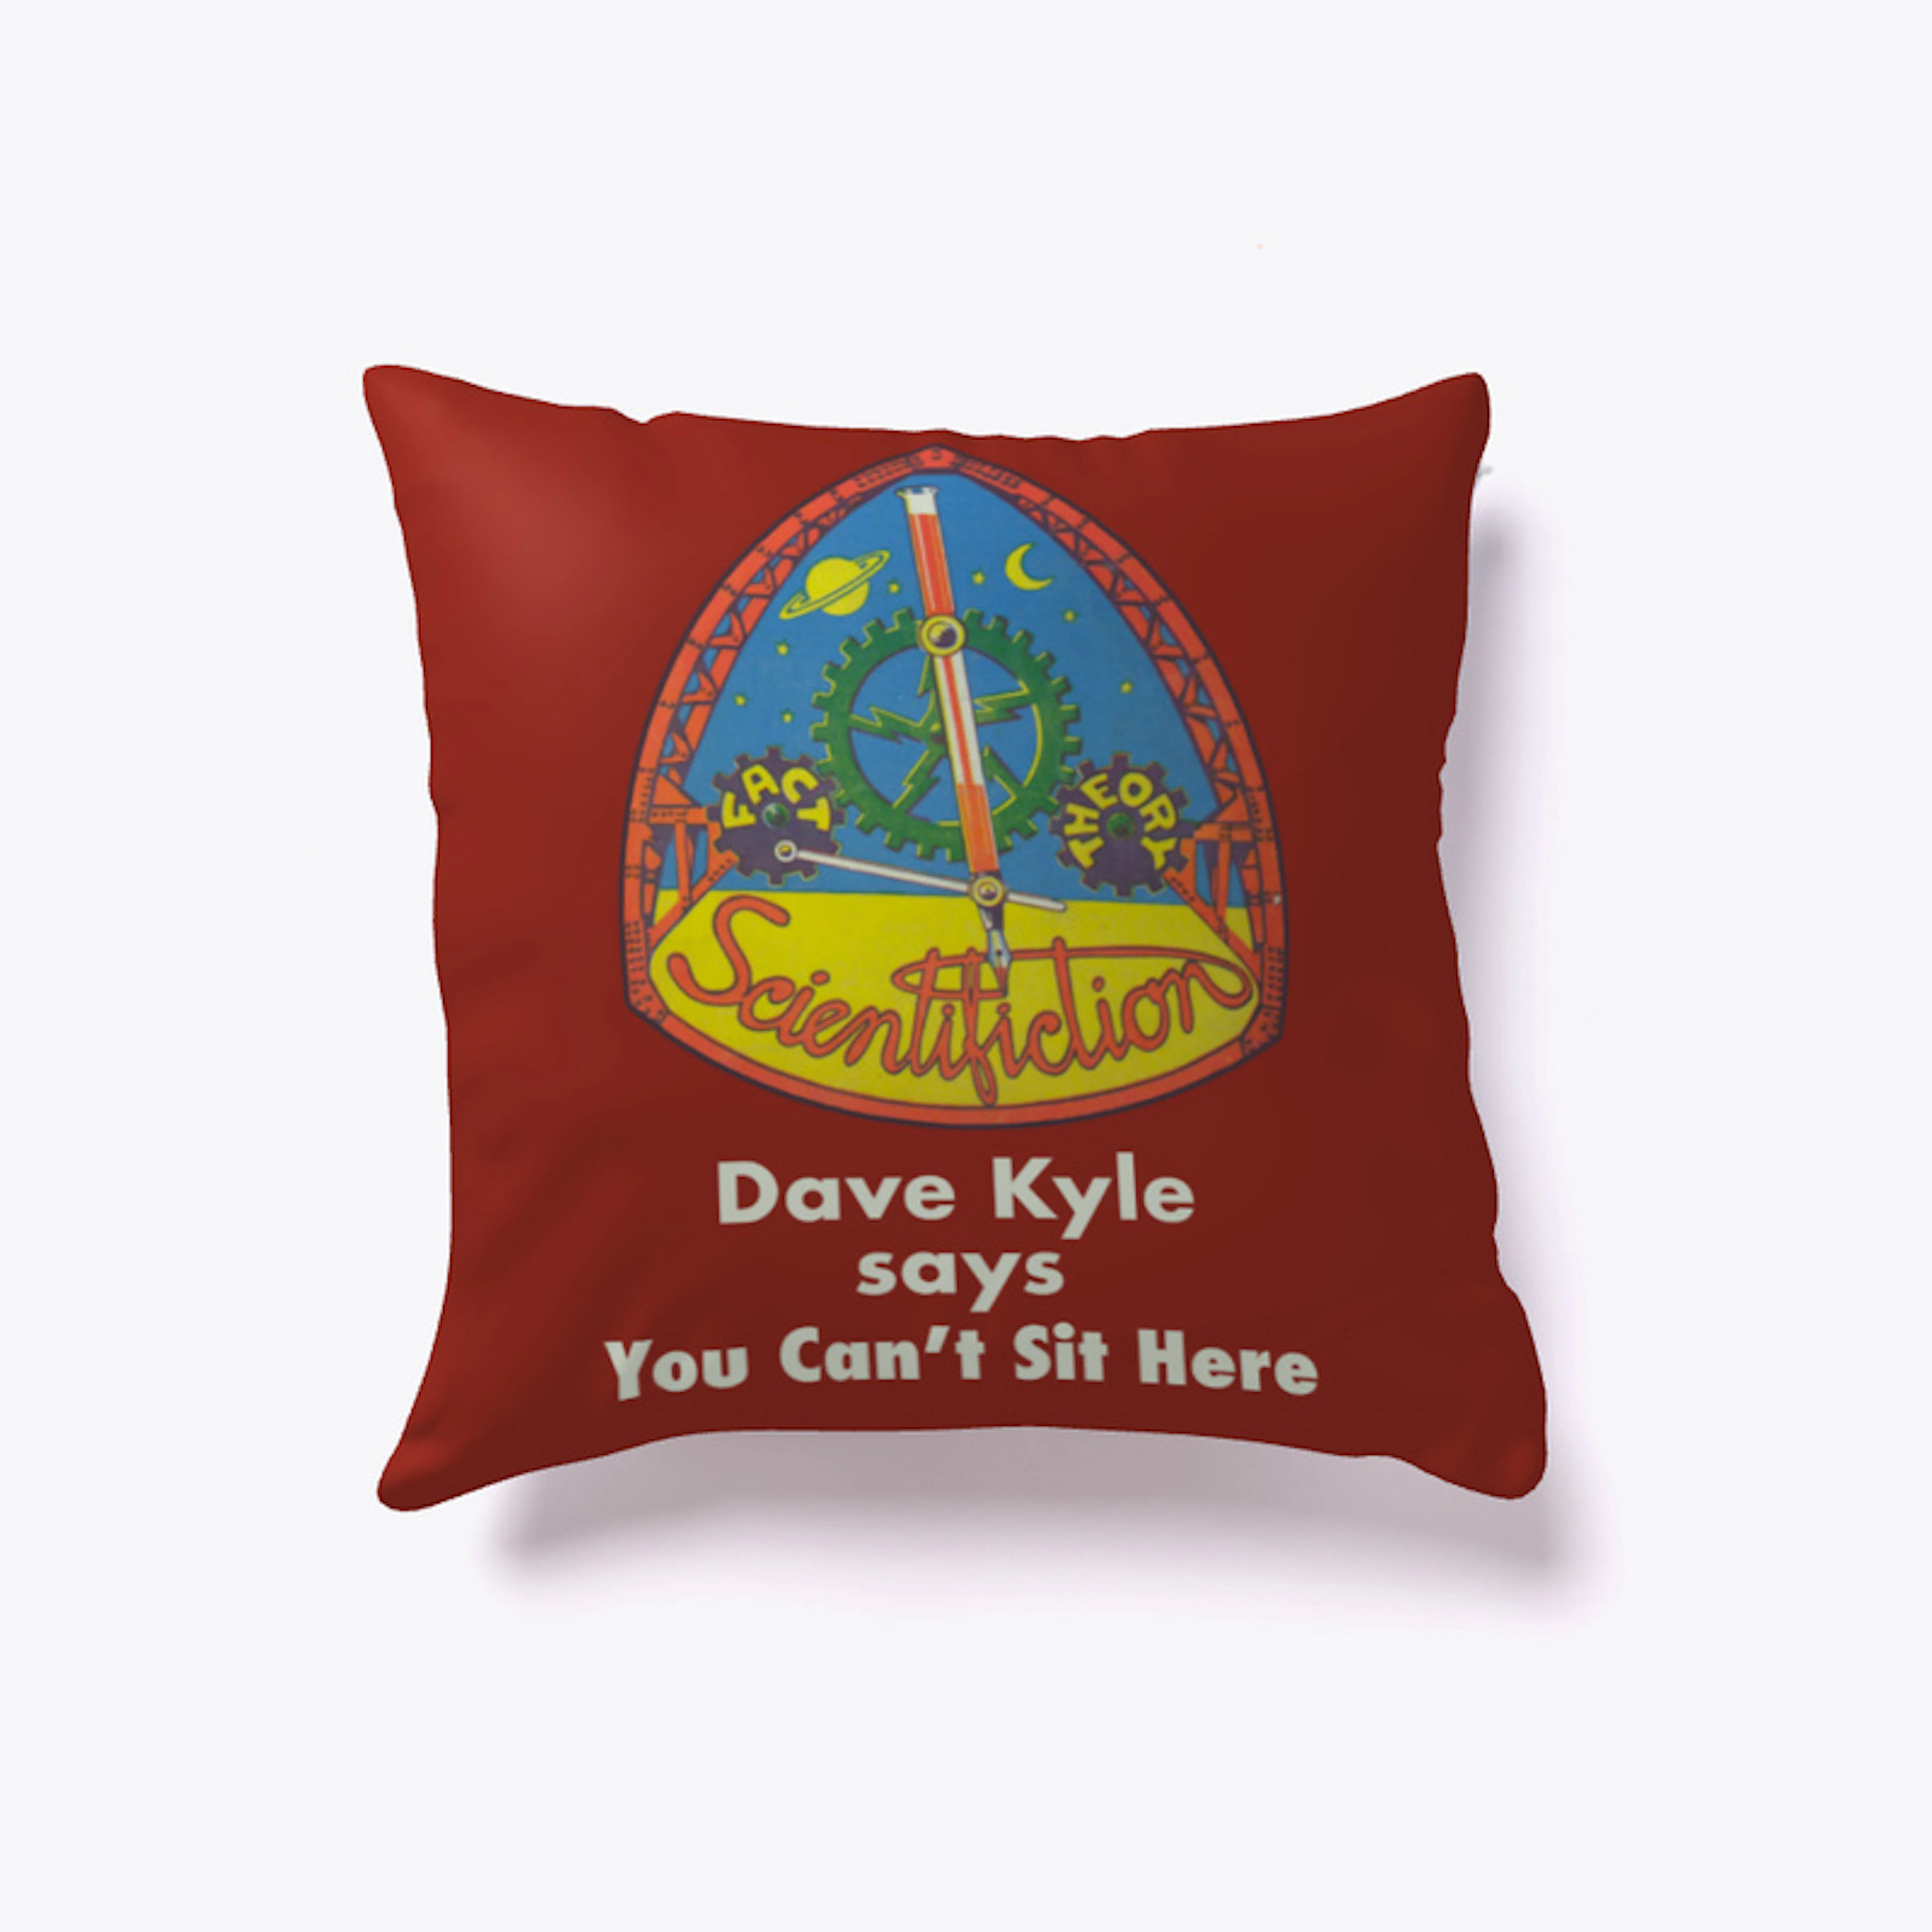 Dave Kyle says You Can't Sit Here